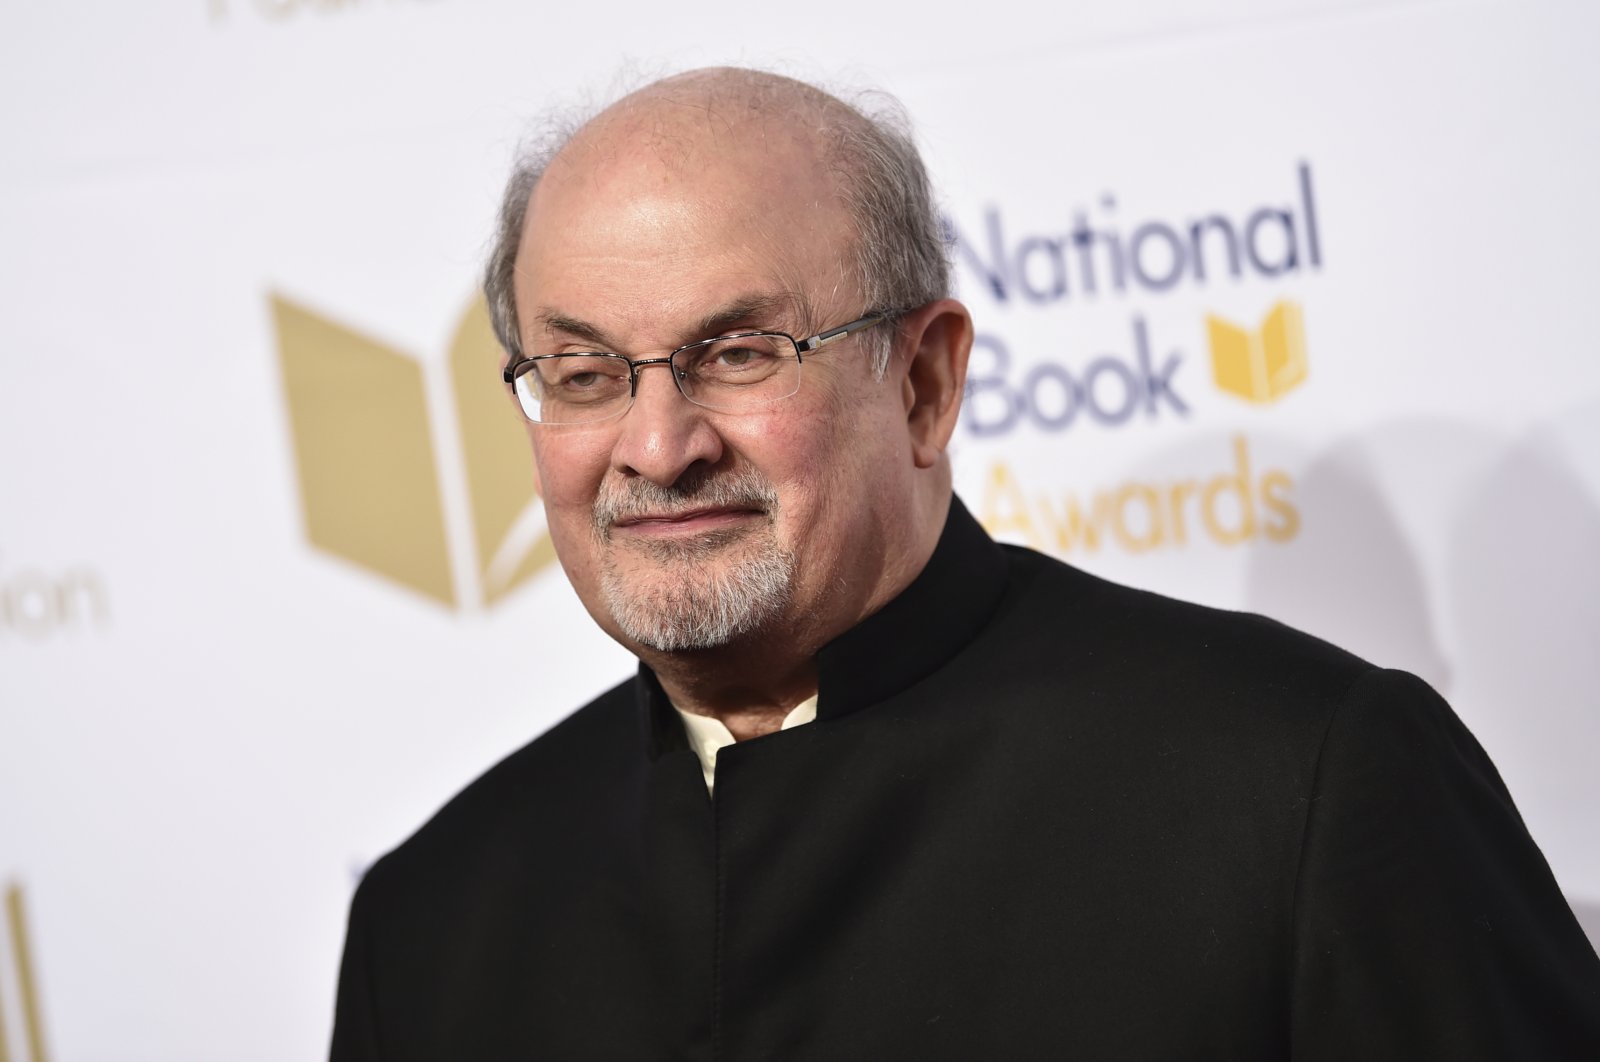 Salman Rushdie attends the 68th National Book Awards Ceremony and Benefit Dinner on Nov. 15, 2017, in New York. (AP Photo)